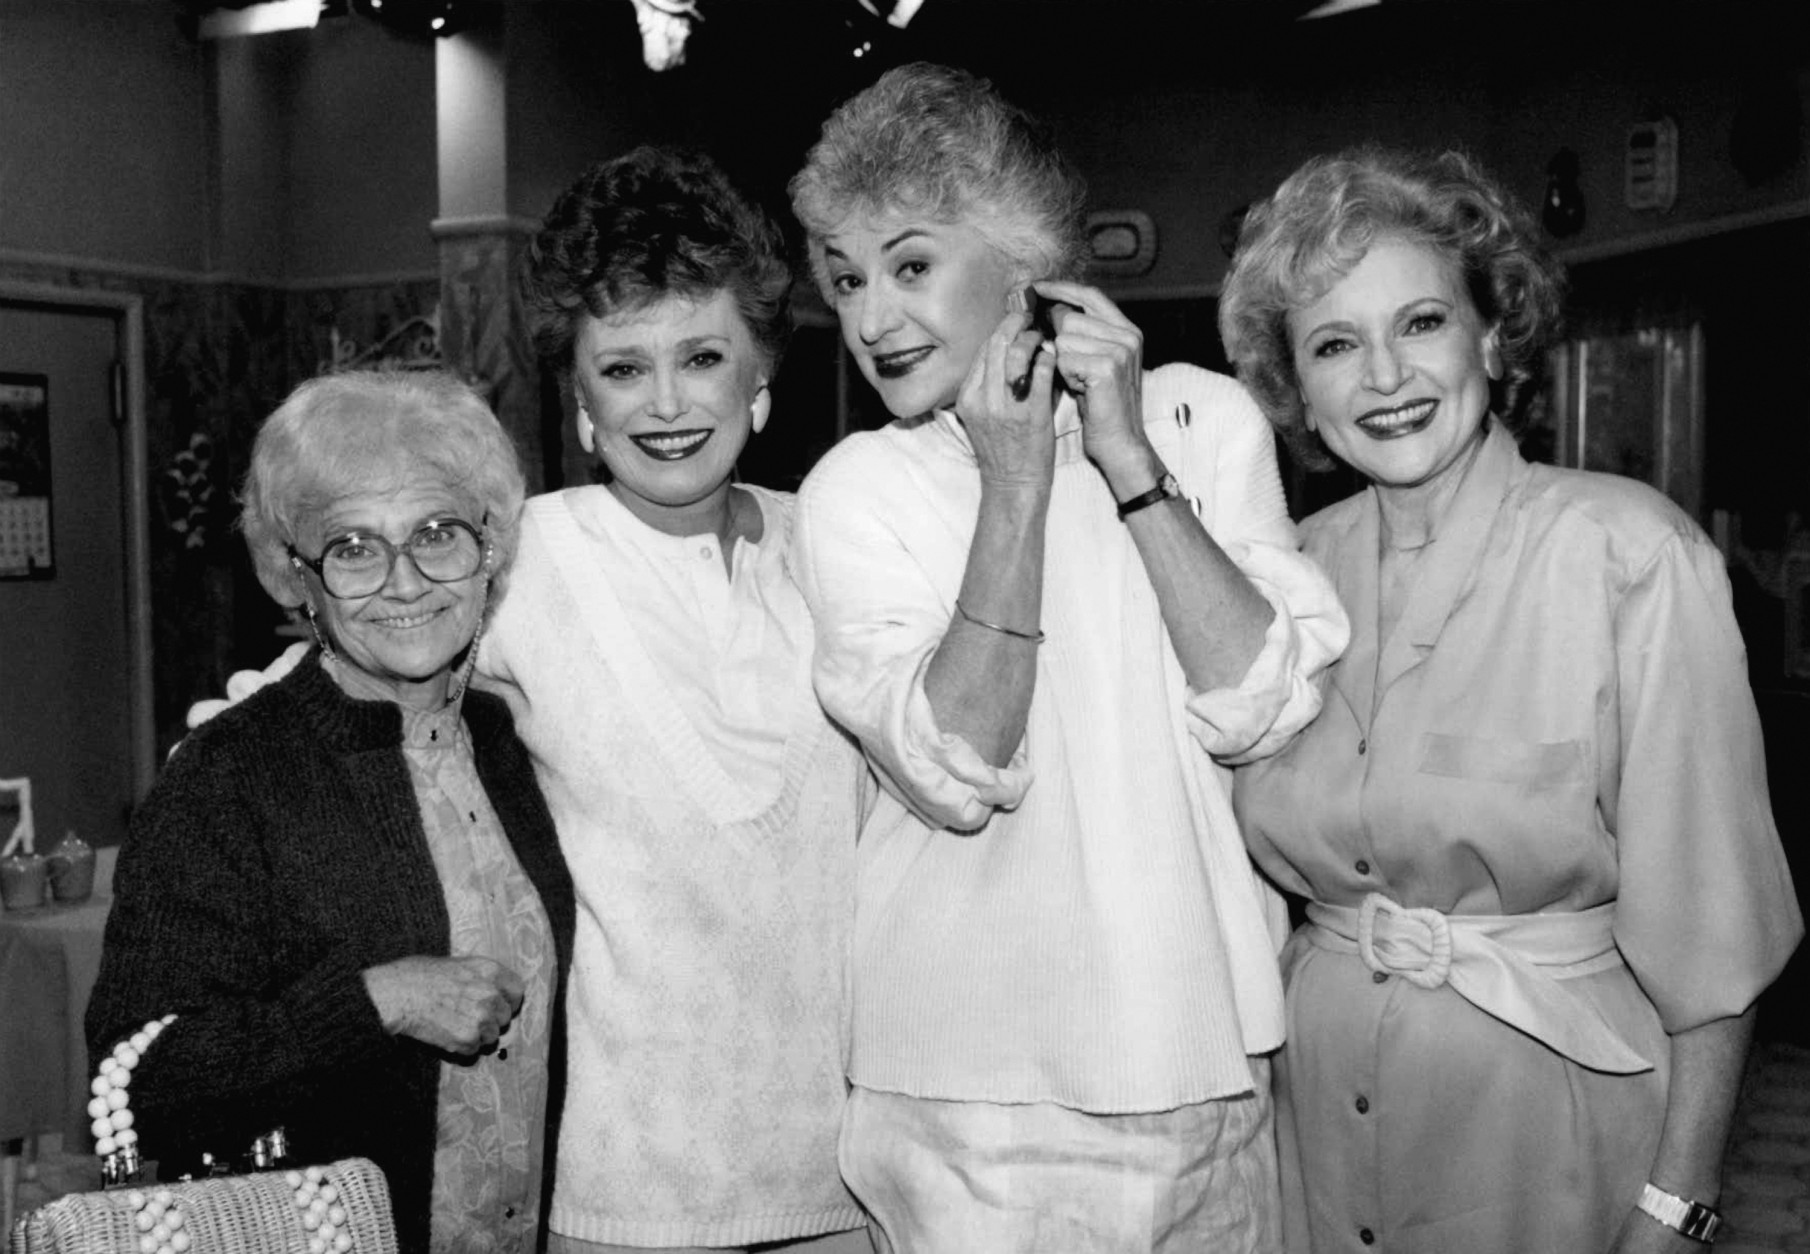 FILE - This Dec. 25, 1985 file photo shows the stars of the television series "The Golden Girls" during a break in taping in Hollywood, Calif. From left are, Estelle Getty, Rue McClanahan, Bea Arthur and Betty White. Family spokesman Dan Watt says 86-year-old Bea Arthur died at home early Saturday, April 25, 2009. He says Arthur had cancer, but declined to give further details. (AP Photo/Nick Ut, File)